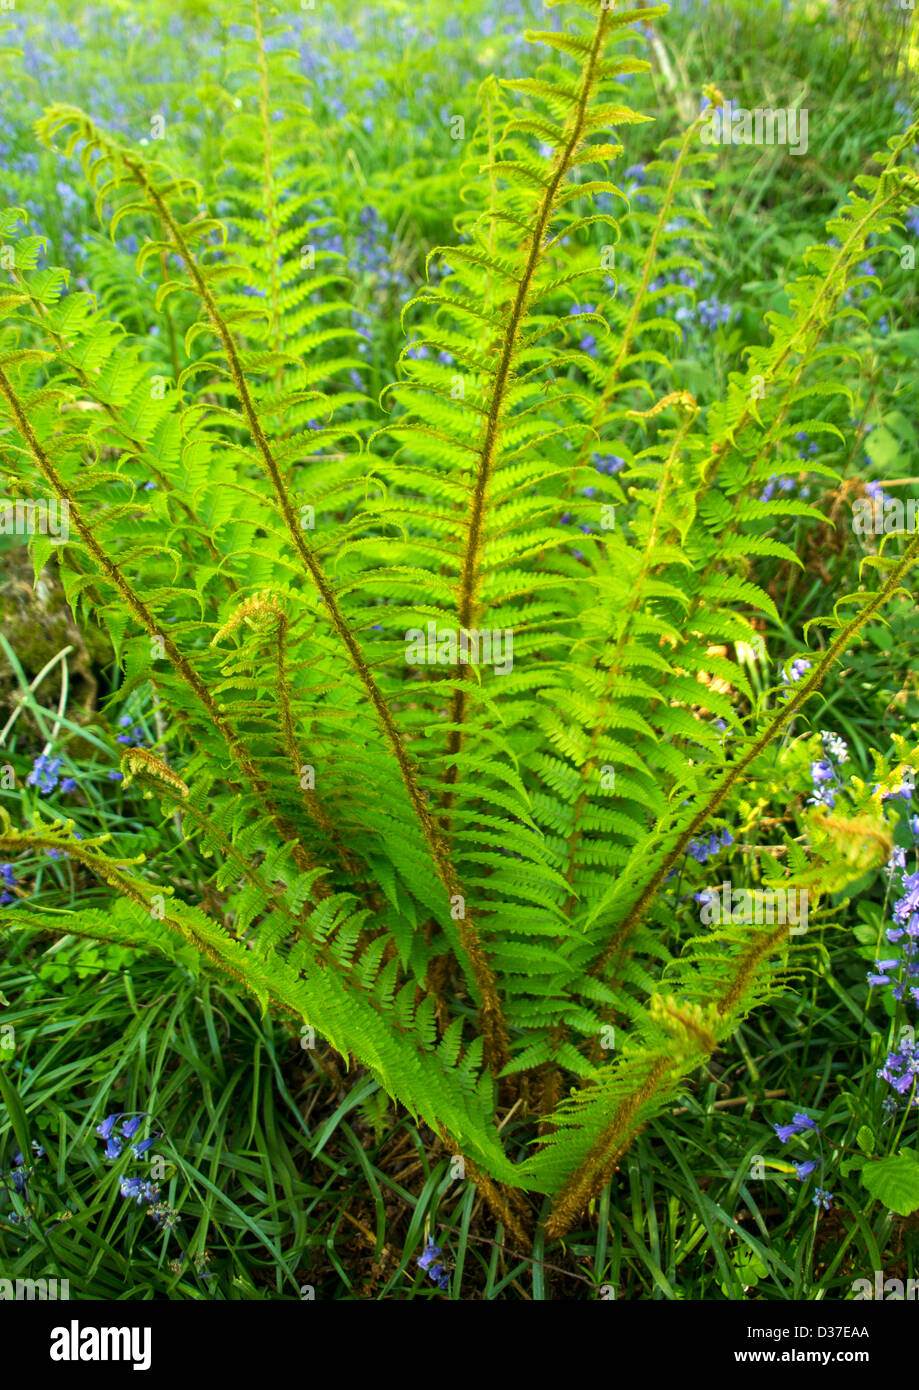 Spring Time Fern by streams edge Stock Photo